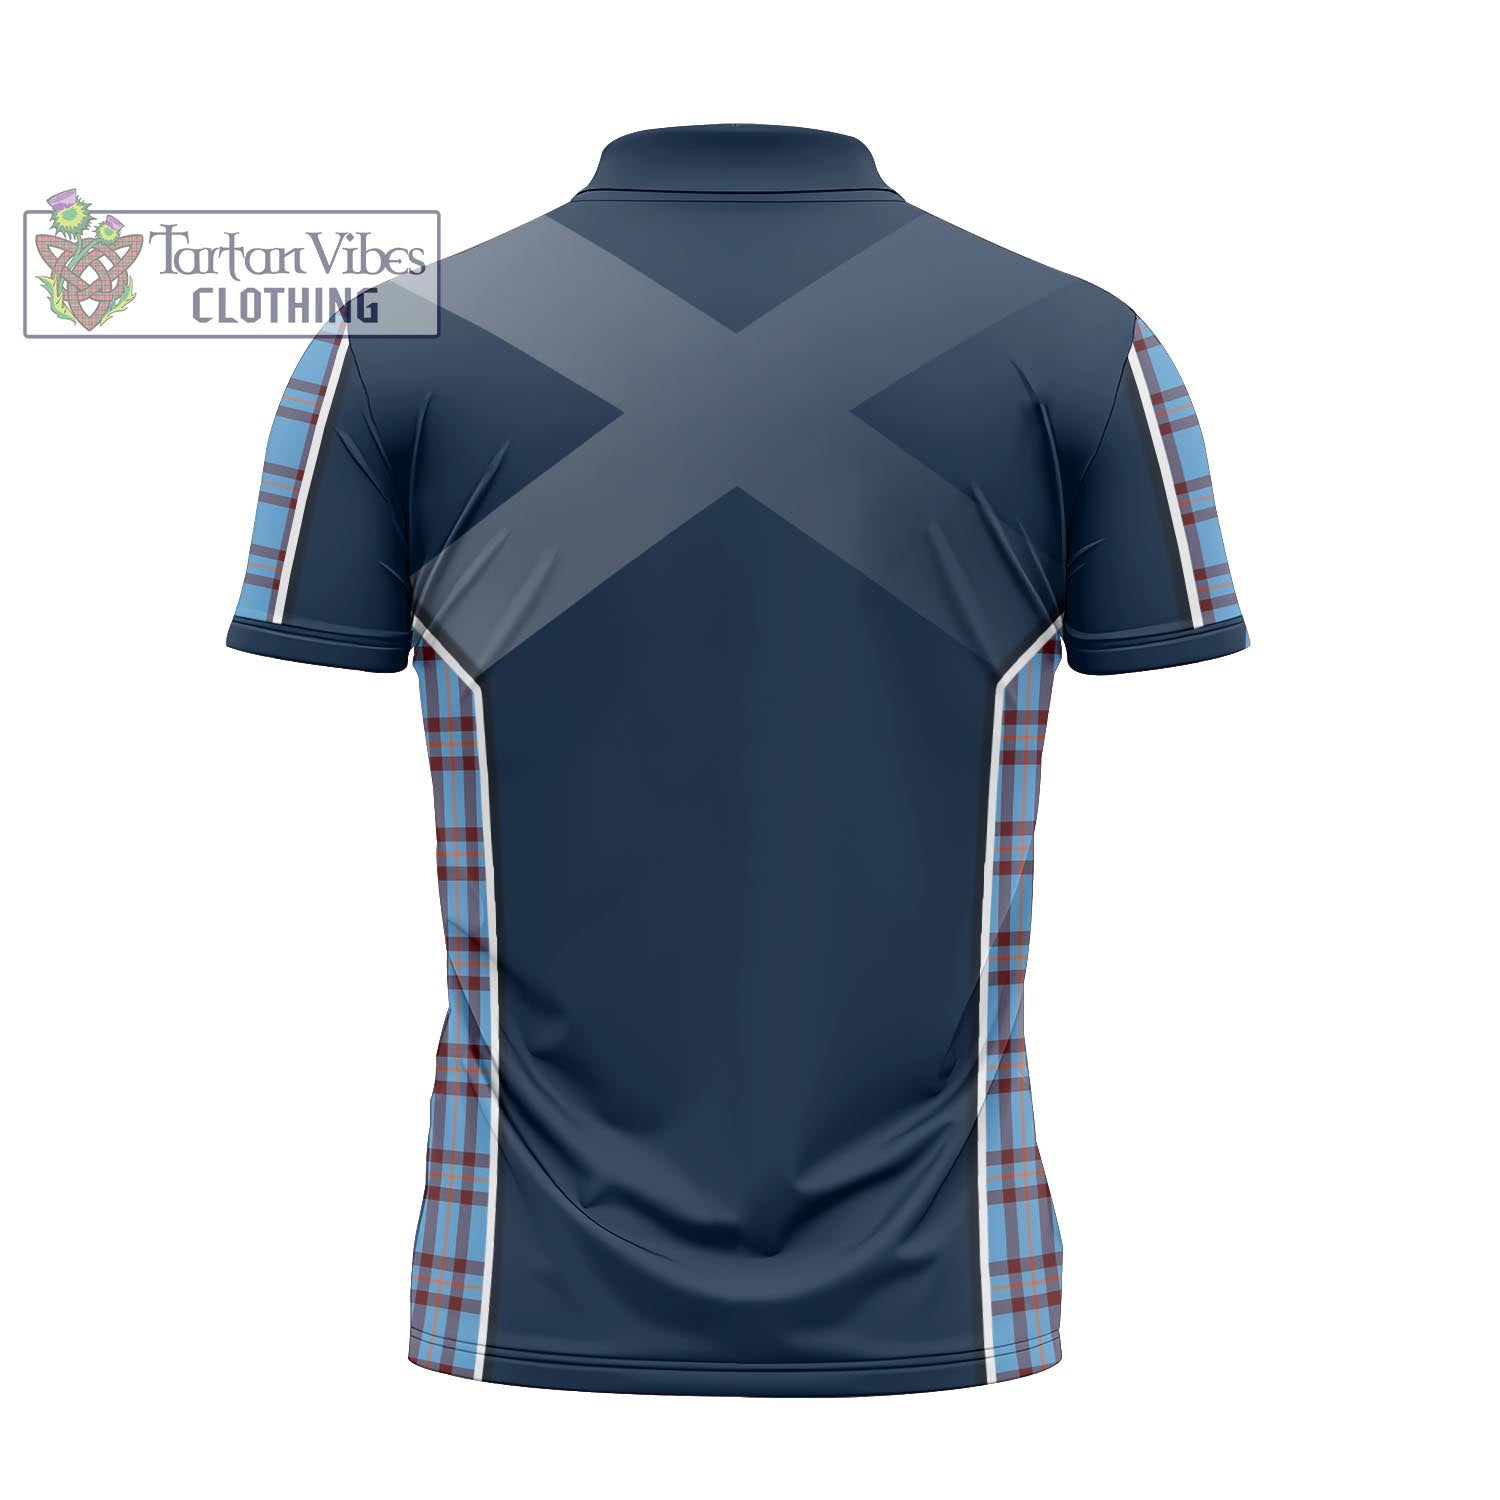 Tartan Vibes Clothing Elliot Ancient Tartan Zipper Polo Shirt with Family Crest and Lion Rampant Vibes Sport Style